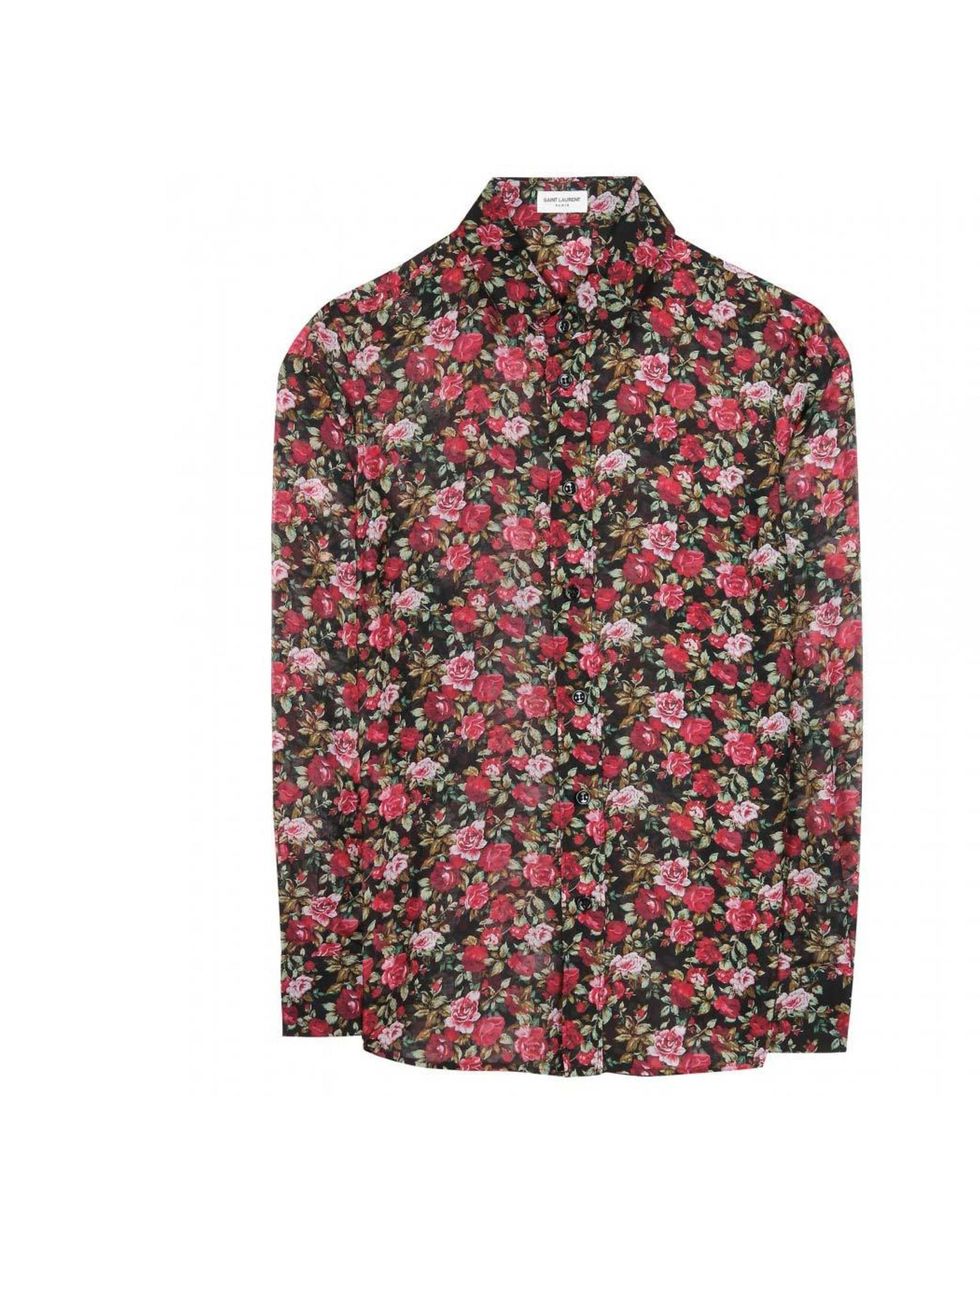 <p>..and stick with the theme by wearing a patterned shirt tied around your waist or unbuttoned.</p><p>We love this floral one from Saint Laurent, £629 available at <a href="http://www.mytheresa.com/en-gb/floral-print-wool-and-silk-blend-shirt-239110.html